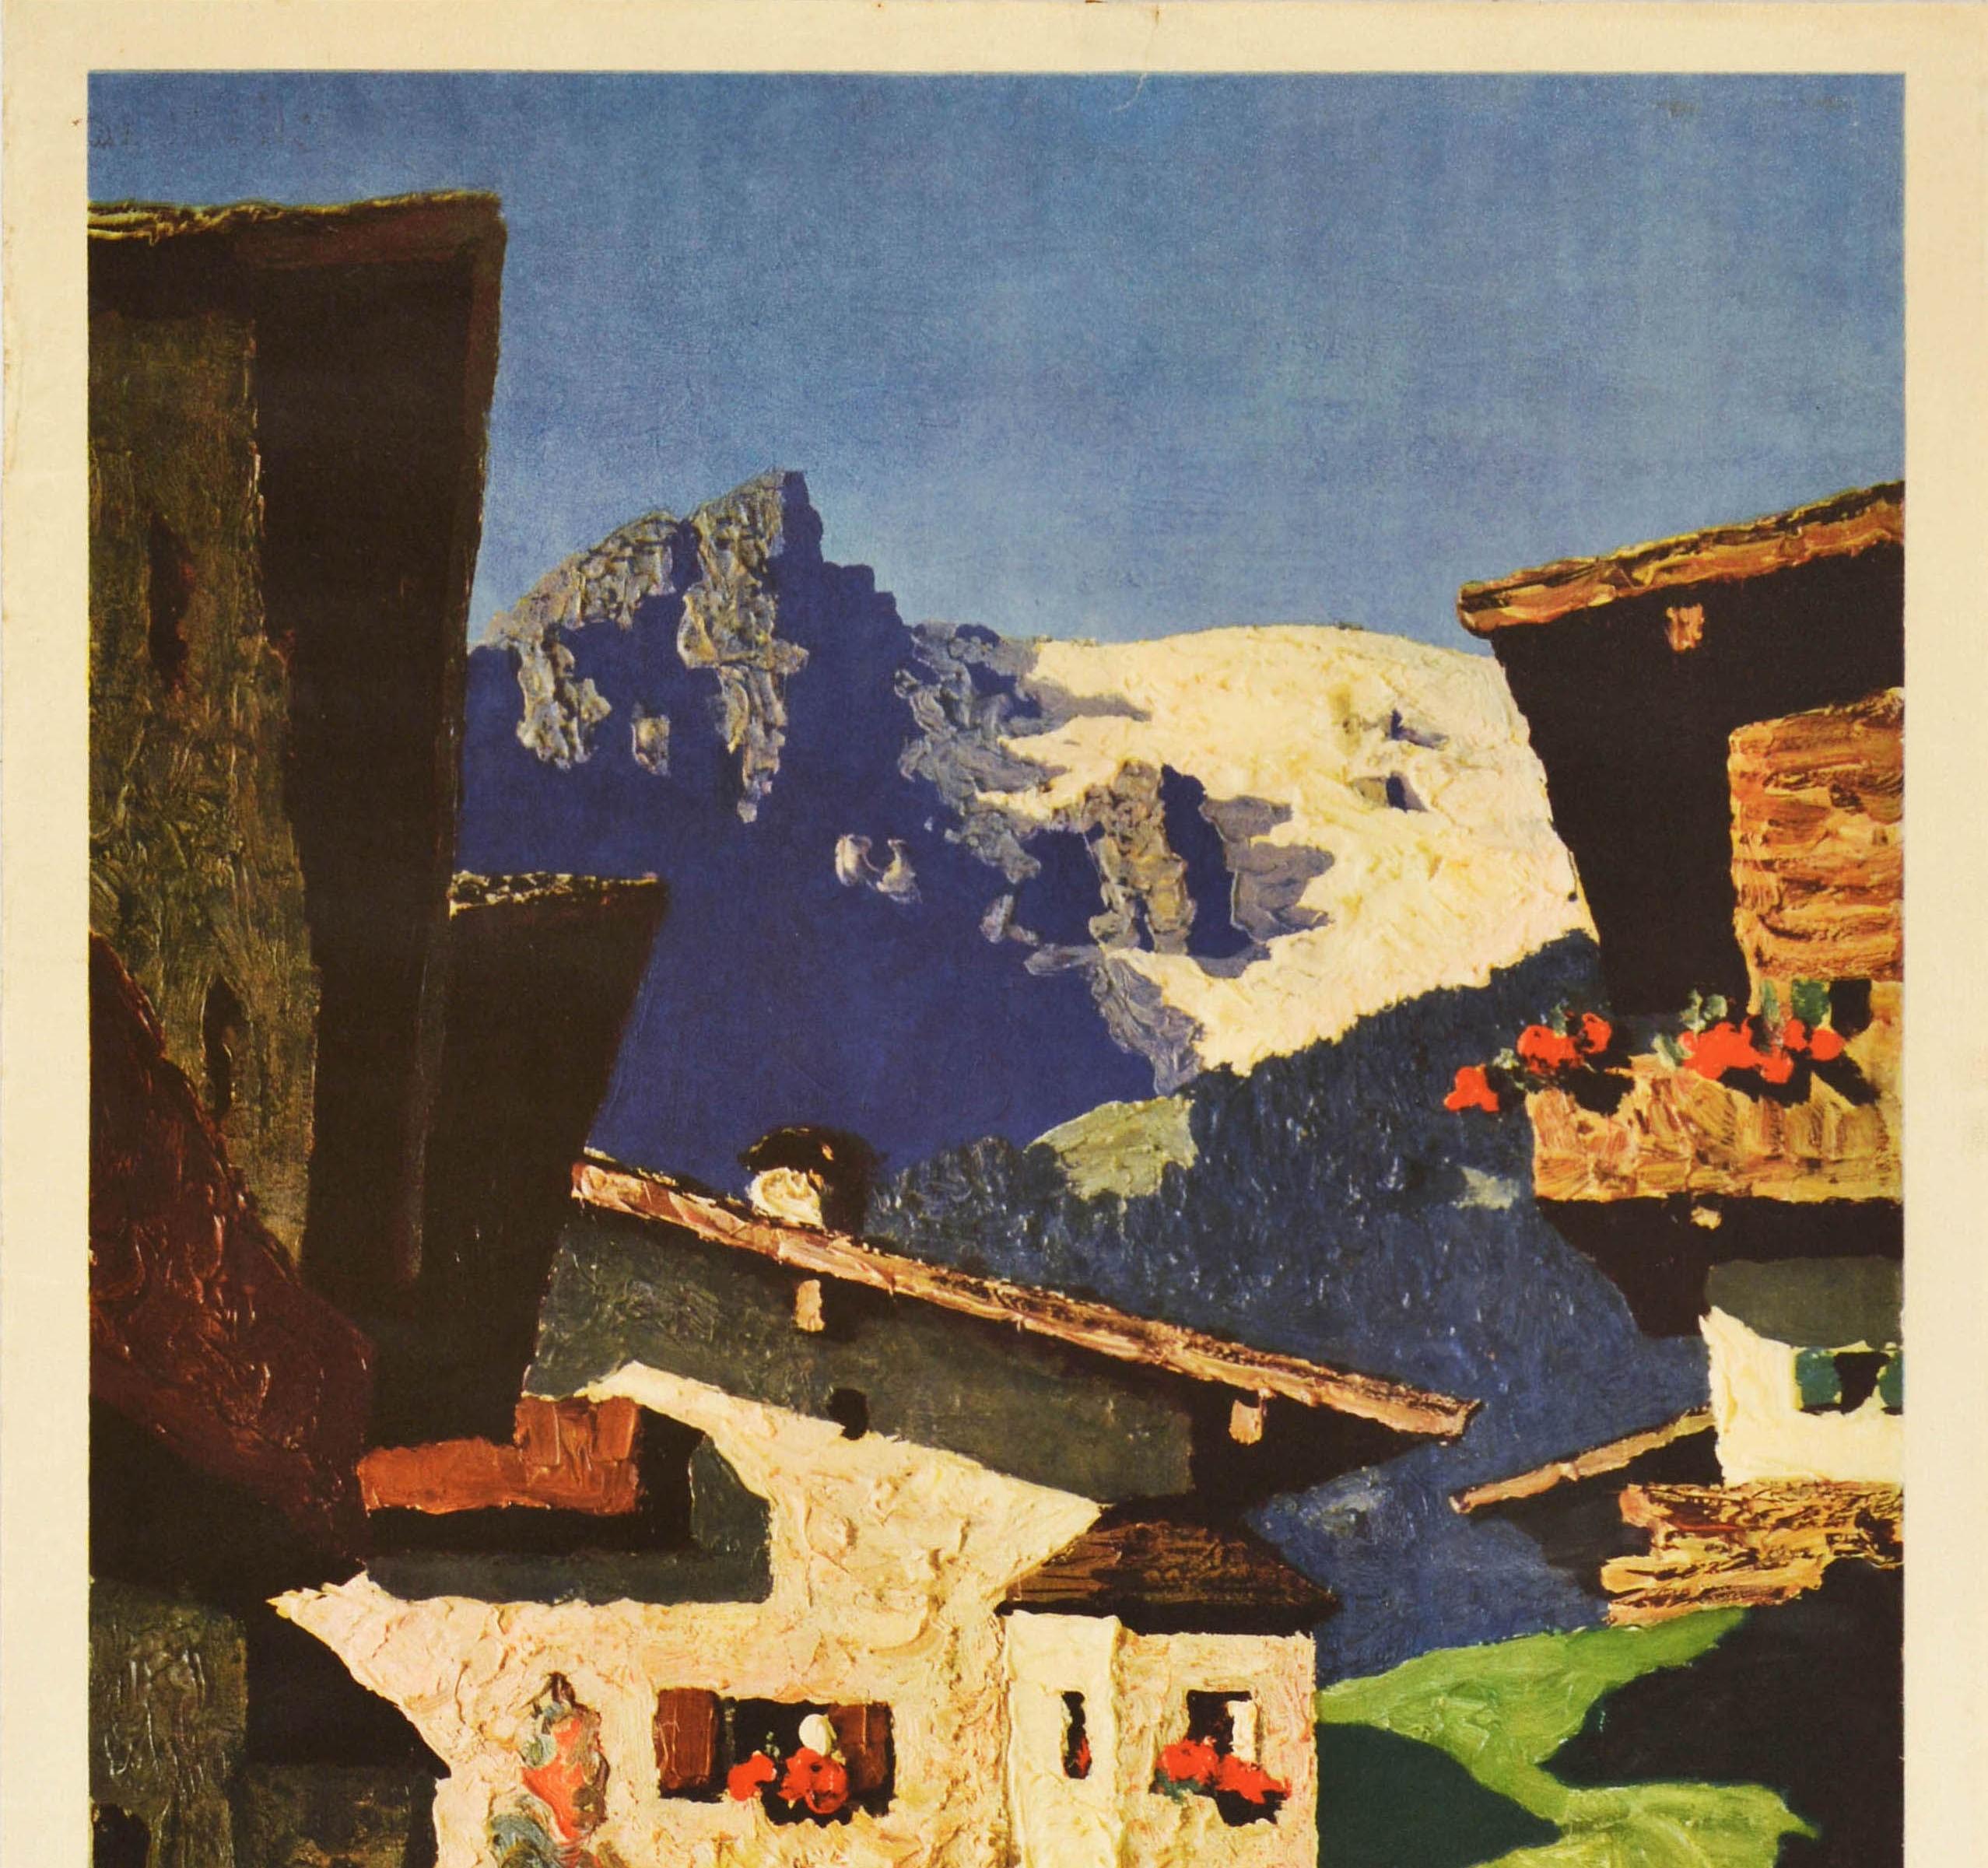 Original vintage travel poster for Tyrol featuring stunning scenic artwork by the Austrian artist Alfons Walde (1891-1958) depicting people walking by traditional buildings in the small medieval town of Kitzbuhel with a view towards the Austrian